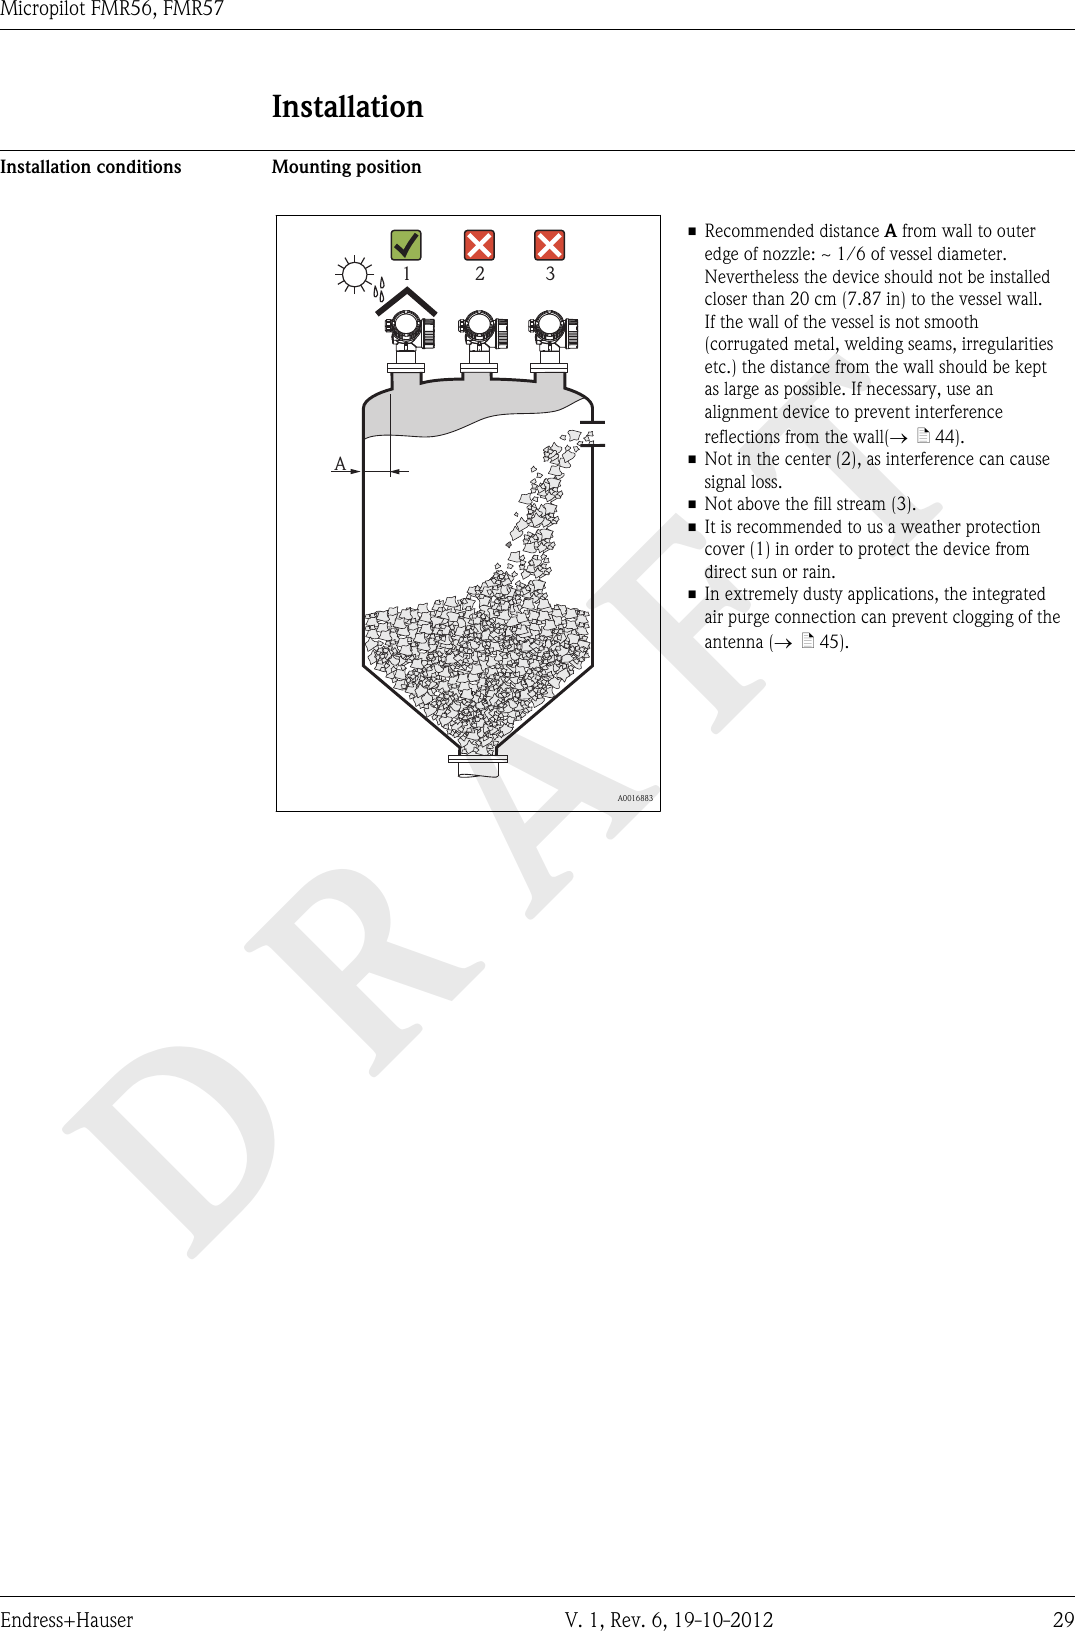 DRAFTMicropilot FMR56, FMR57Endress+Hauser V. 1, Rev. 6, 19-10-2012 29InstallationInstallation conditions Mounting positionA1 2 3  A0016883• Recommended distance A from wall to outeredge of nozzle: ~ 1/6 of vessel diameter.Nevertheless the device should not be installedcloser than 20 cm (7.87 in) to the vessel wall.If the wall of the vessel is not smooth(corrugated metal, welding seams, irregularitiesetc.) the distance from the wall should be keptas large as possible. If necessary, use analignment device to prevent interferencereflections from the wall(®  ä 44).• Not in the center (2), as interference can causesignal loss.• Not above the fill stream (3).• It is recommended to us a weather protectioncover (1) in order to protect the device fromdirect sun or rain.• In extremely dusty applications, the integratedair purge connection can prevent clogging of theantenna (®  ä 45).